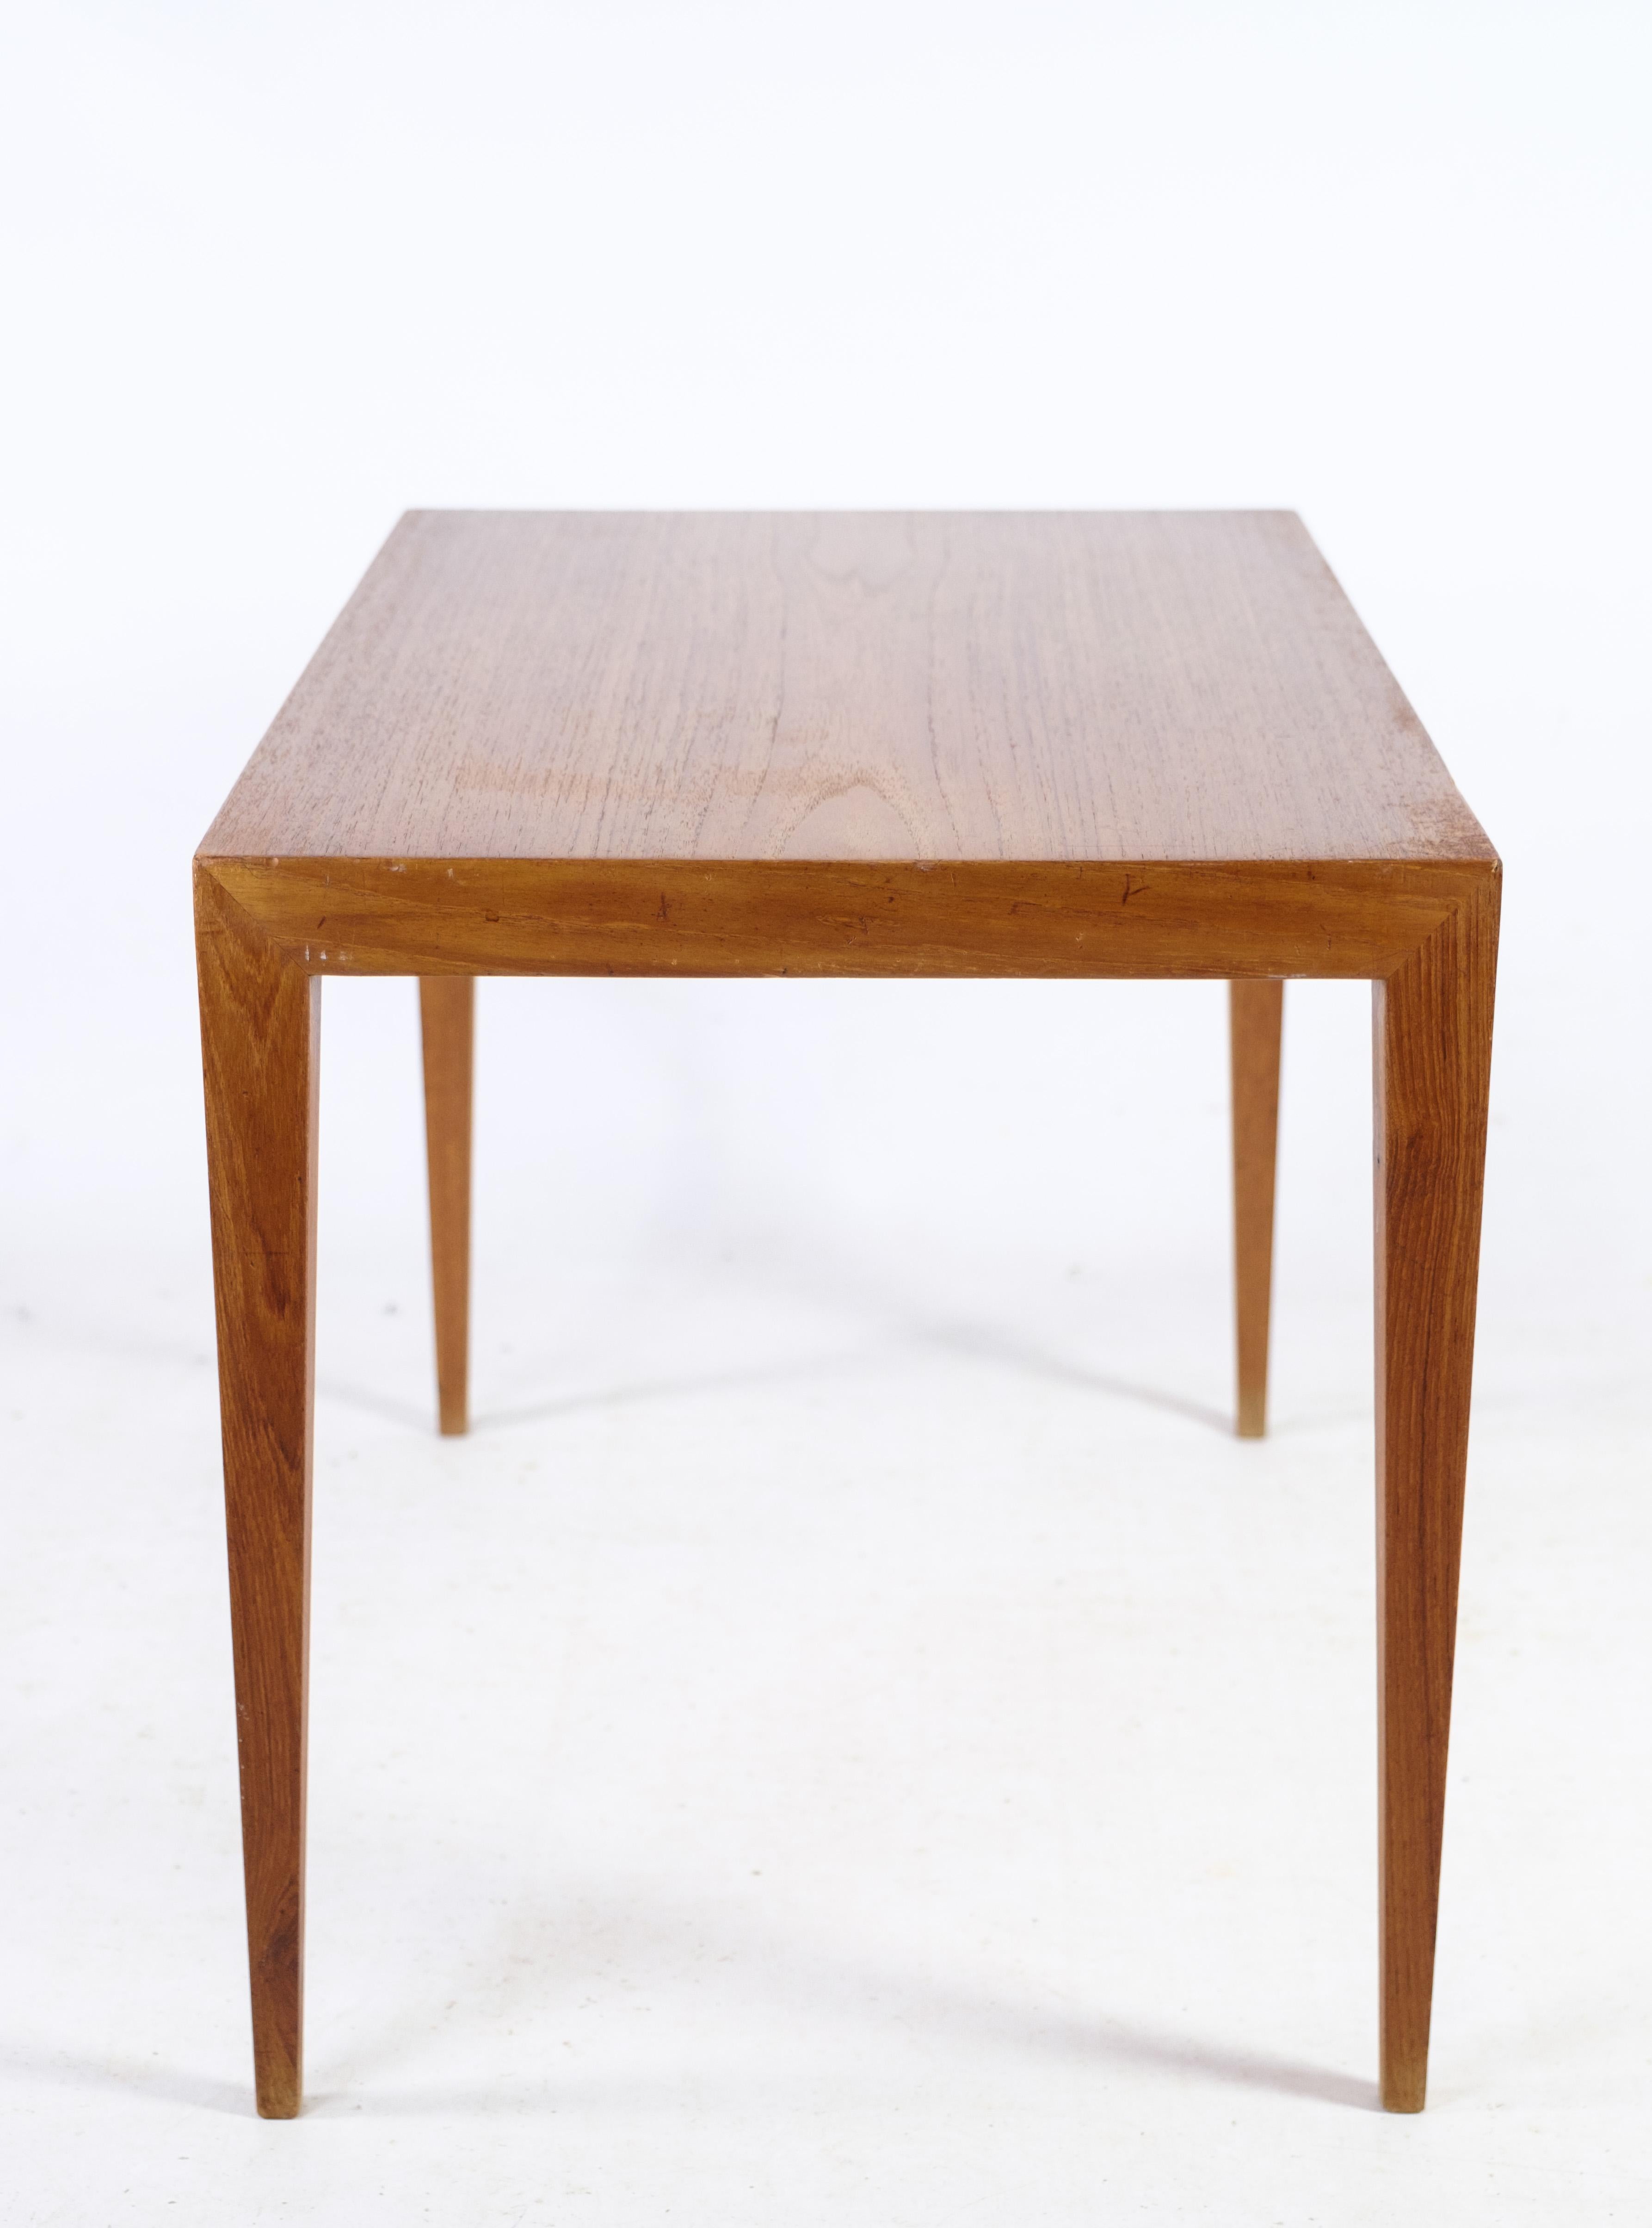 This side table in teak, designed by the esteemed Severin Hansen and manufactured by Haslev Møbelfabrik in the 1960s, is a testament to the timeless elegance of Danish design.

Severin Hansen's expertise in creating functional yet stylish furniture